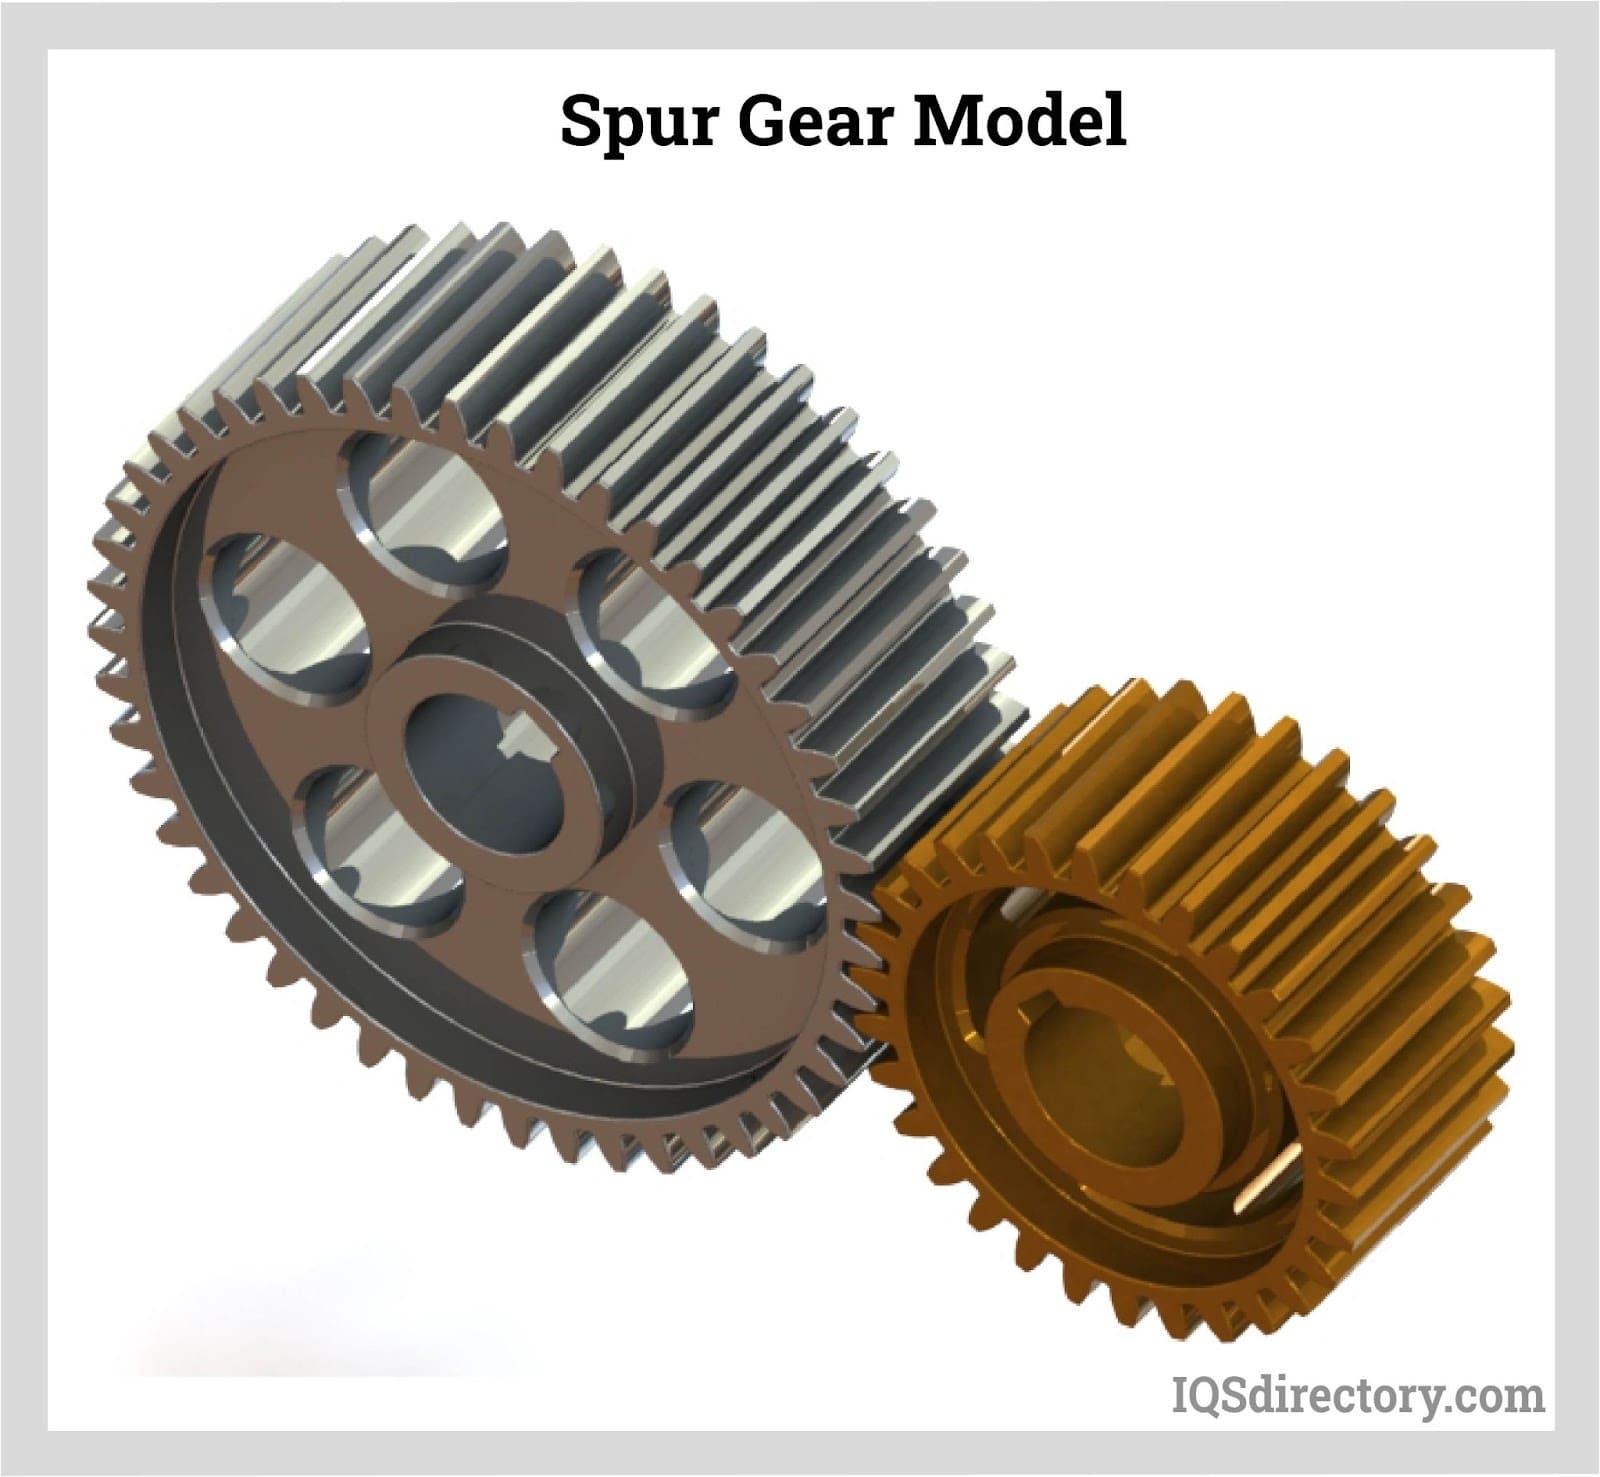 The sketch unscaled below shows the top and side views of a twopass  compound spur gear train driven by a motor The gears all have the same  diametral pitch and the pinion